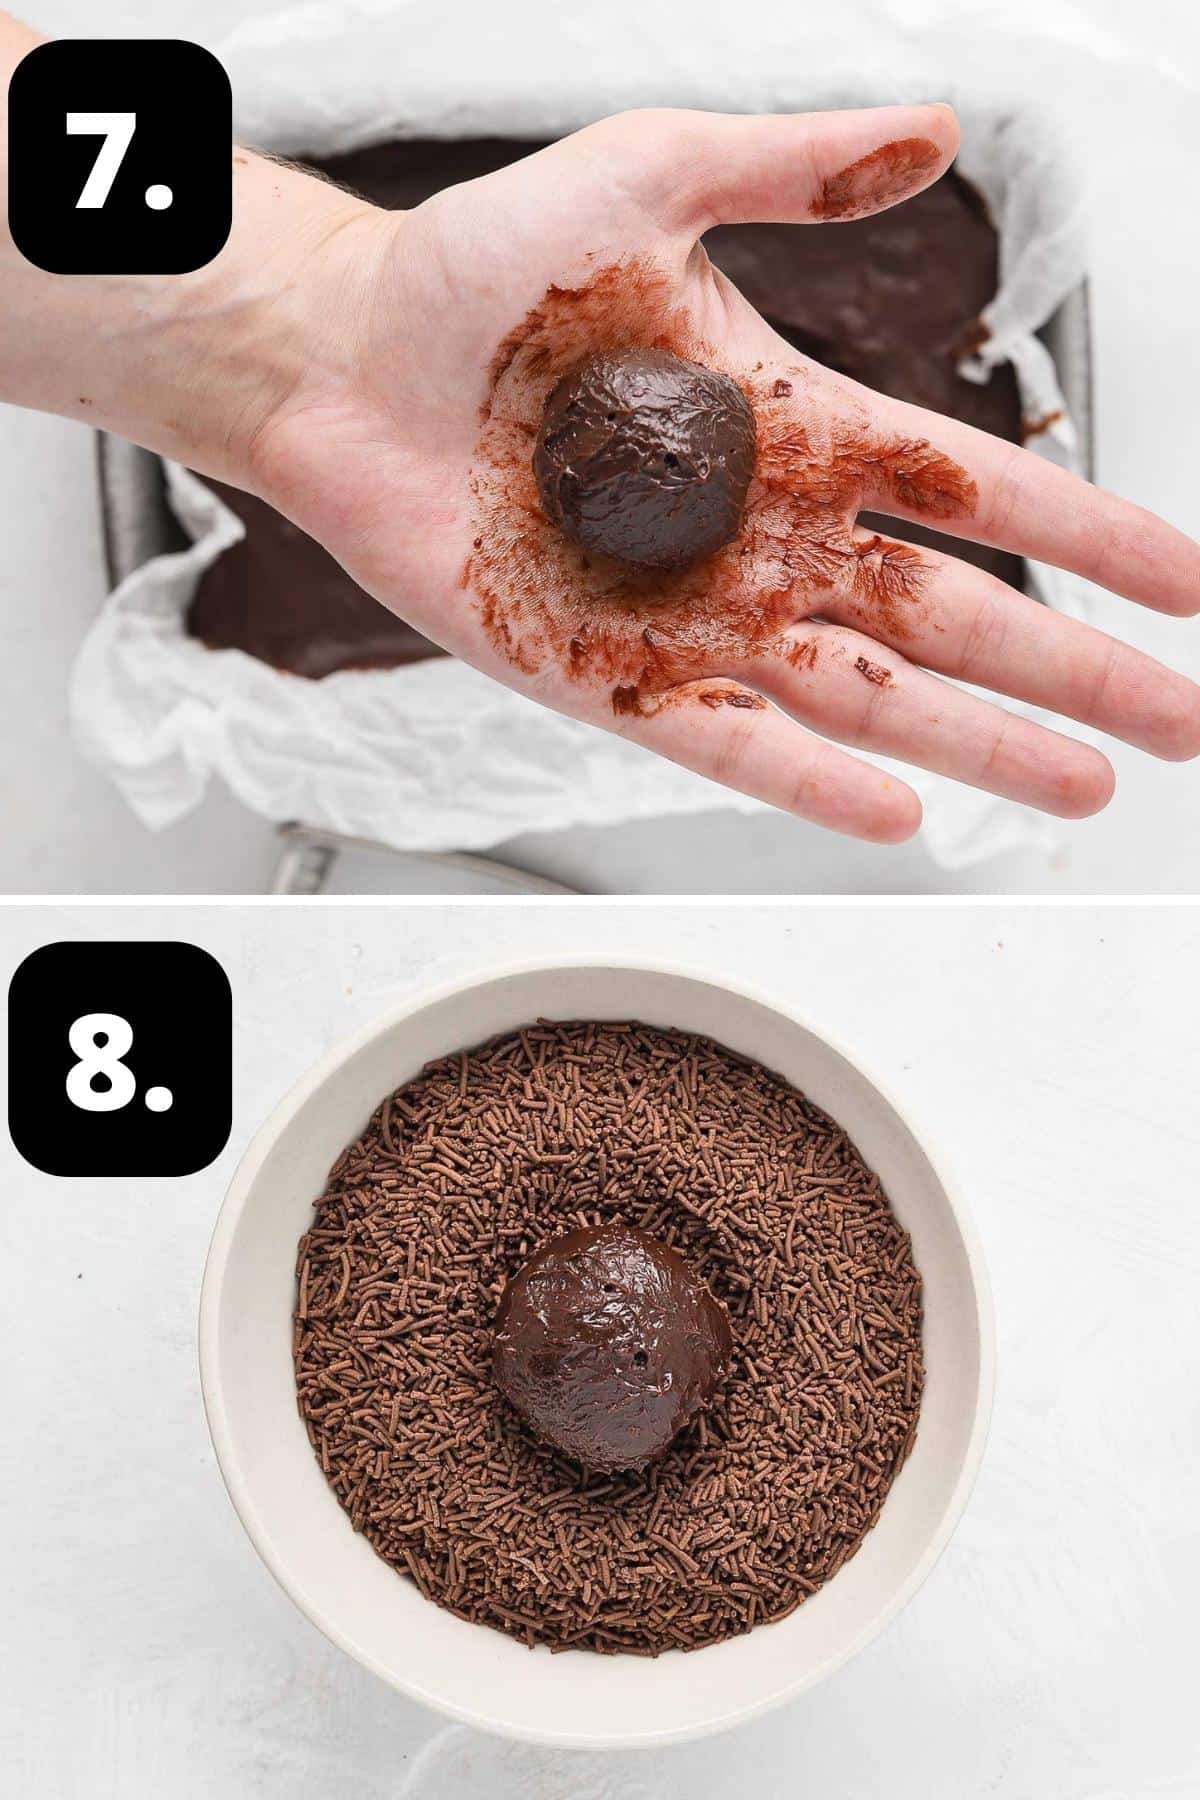 Steps 7-8 of preparing this recipe - the rolled chocolate truffles and coating in the chocolate sprinkles.